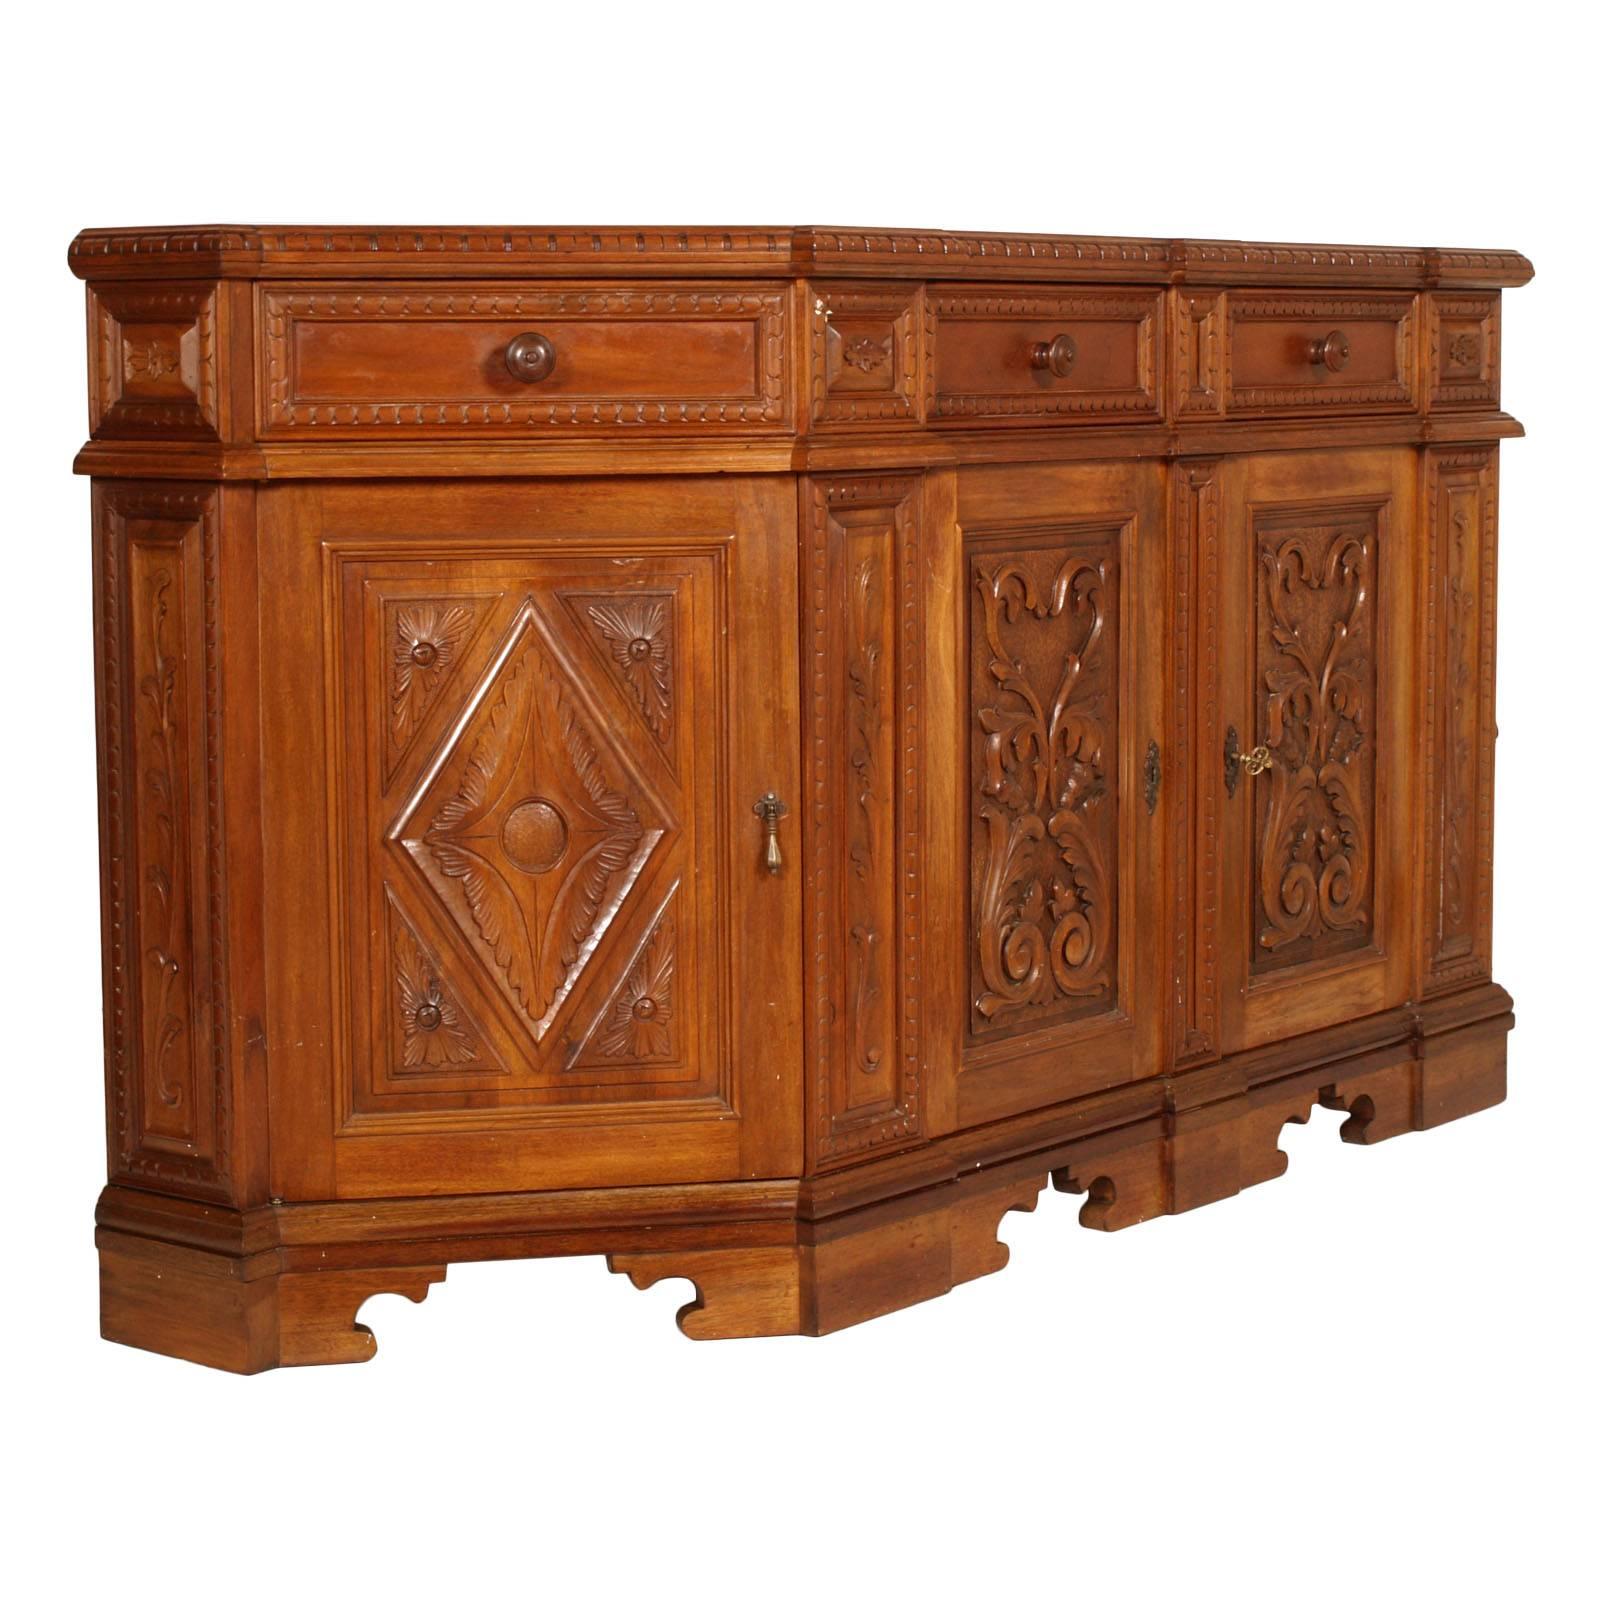 Early 20th century, Italy Tuscan Renaissance credenza, in carved blond walnut polished to wax

Measure cm: H 95 x W 200 x D 50. 

All internal shelves are removable and repositionable as desired. Measurements of the two central compartments W 58x62